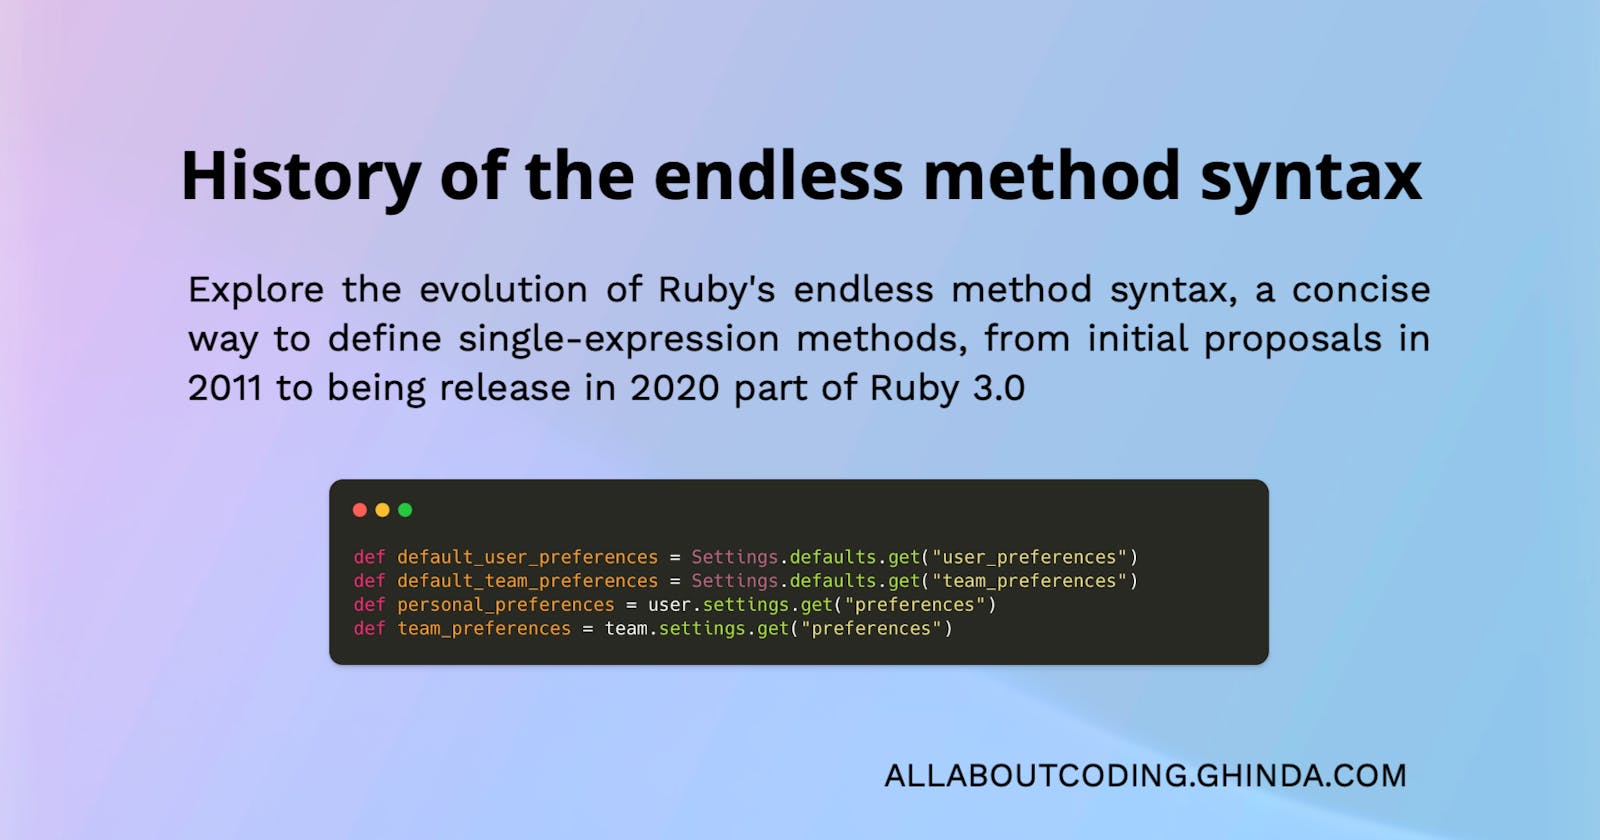 History of the endless method syntax